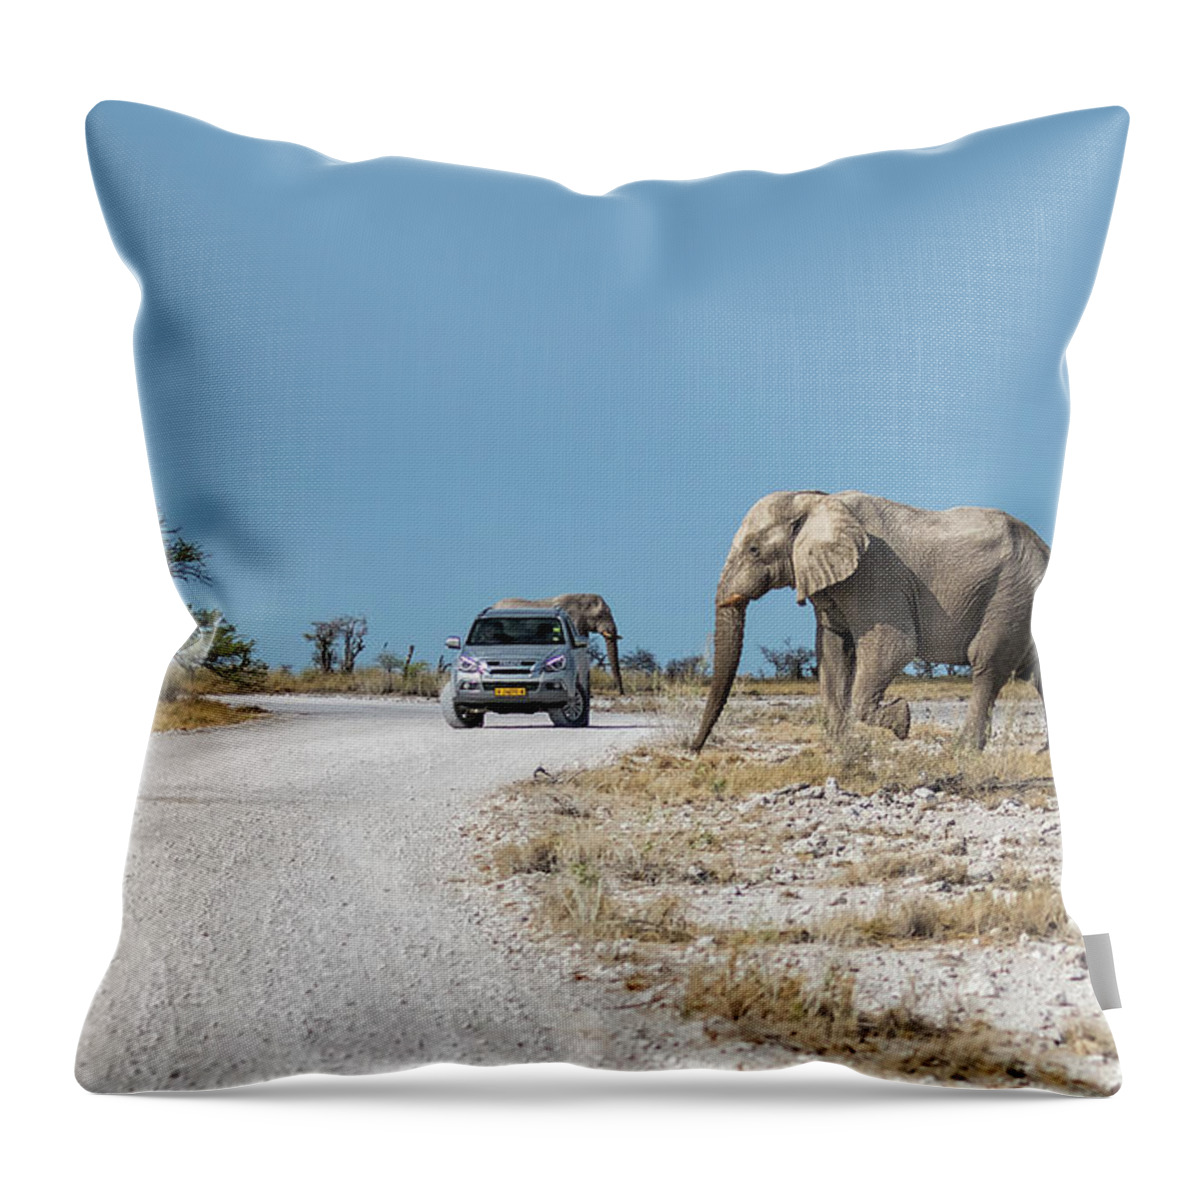 African Elephants Throw Pillow featuring the photograph Elephant Crossing by Belinda Greb